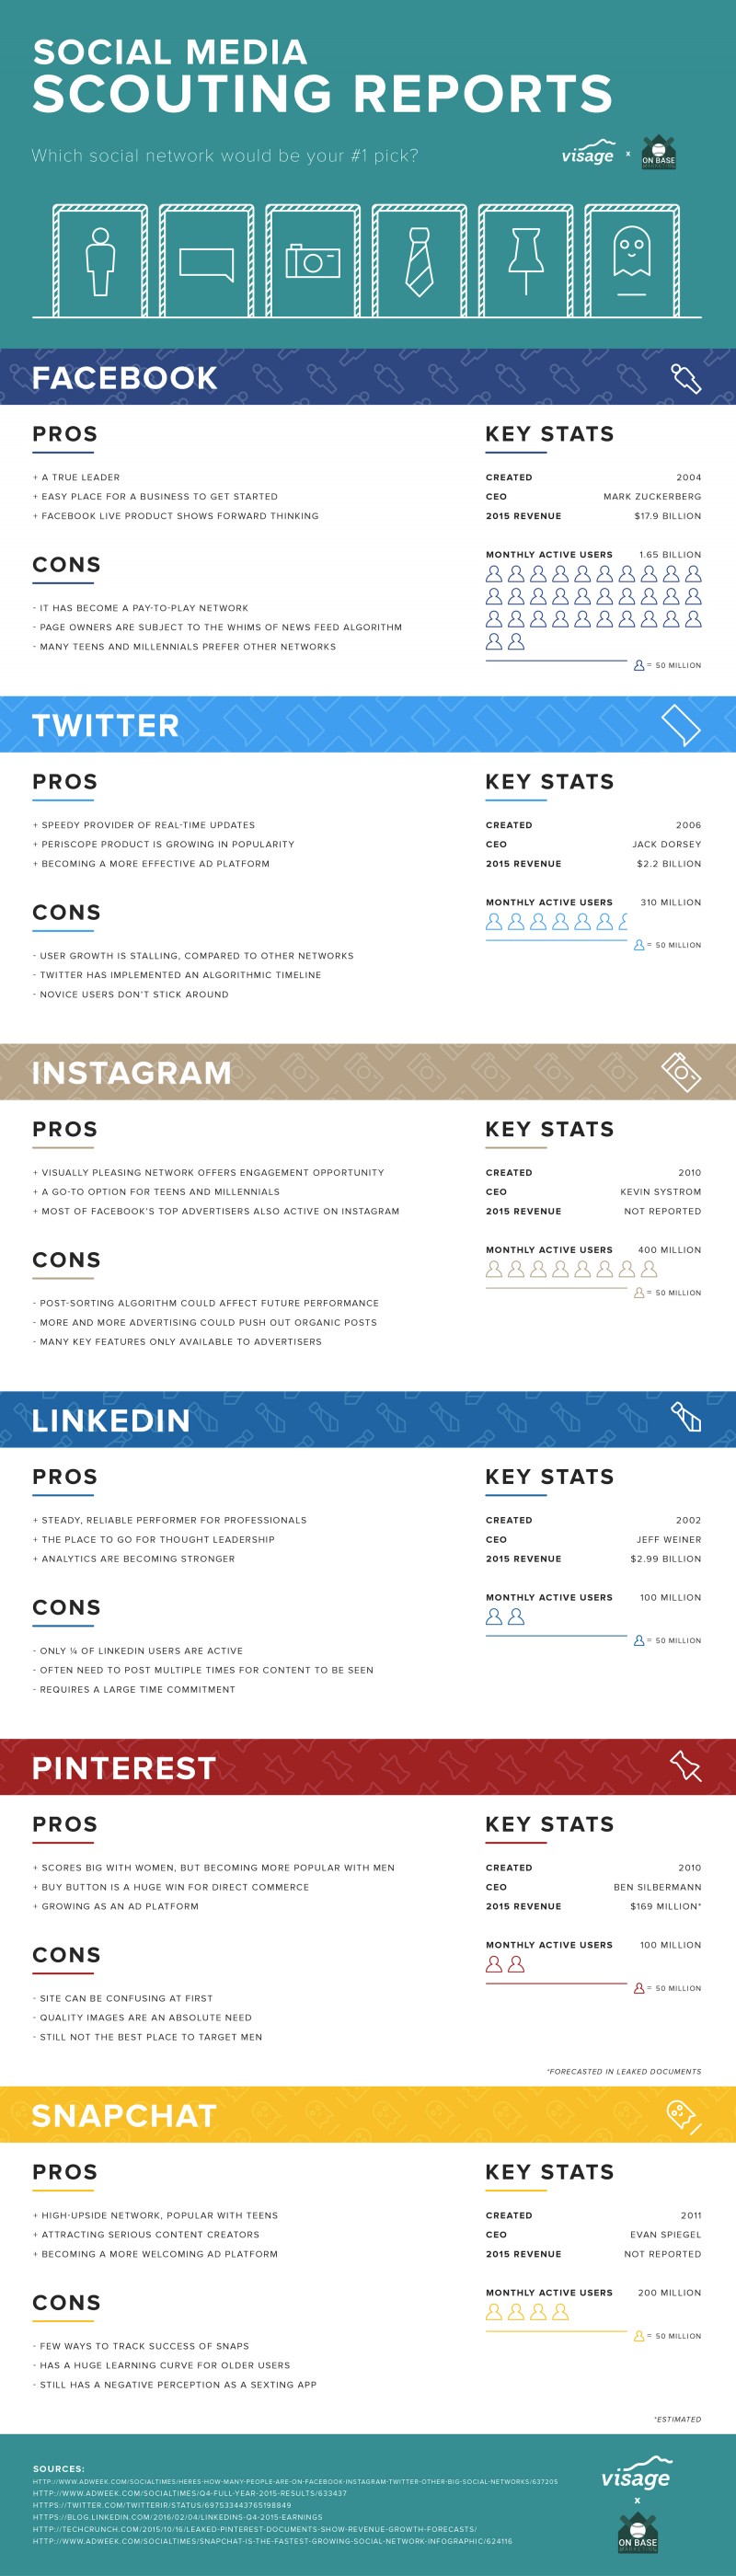 Pros & Cons to help you pick the right social media channel - YibLab